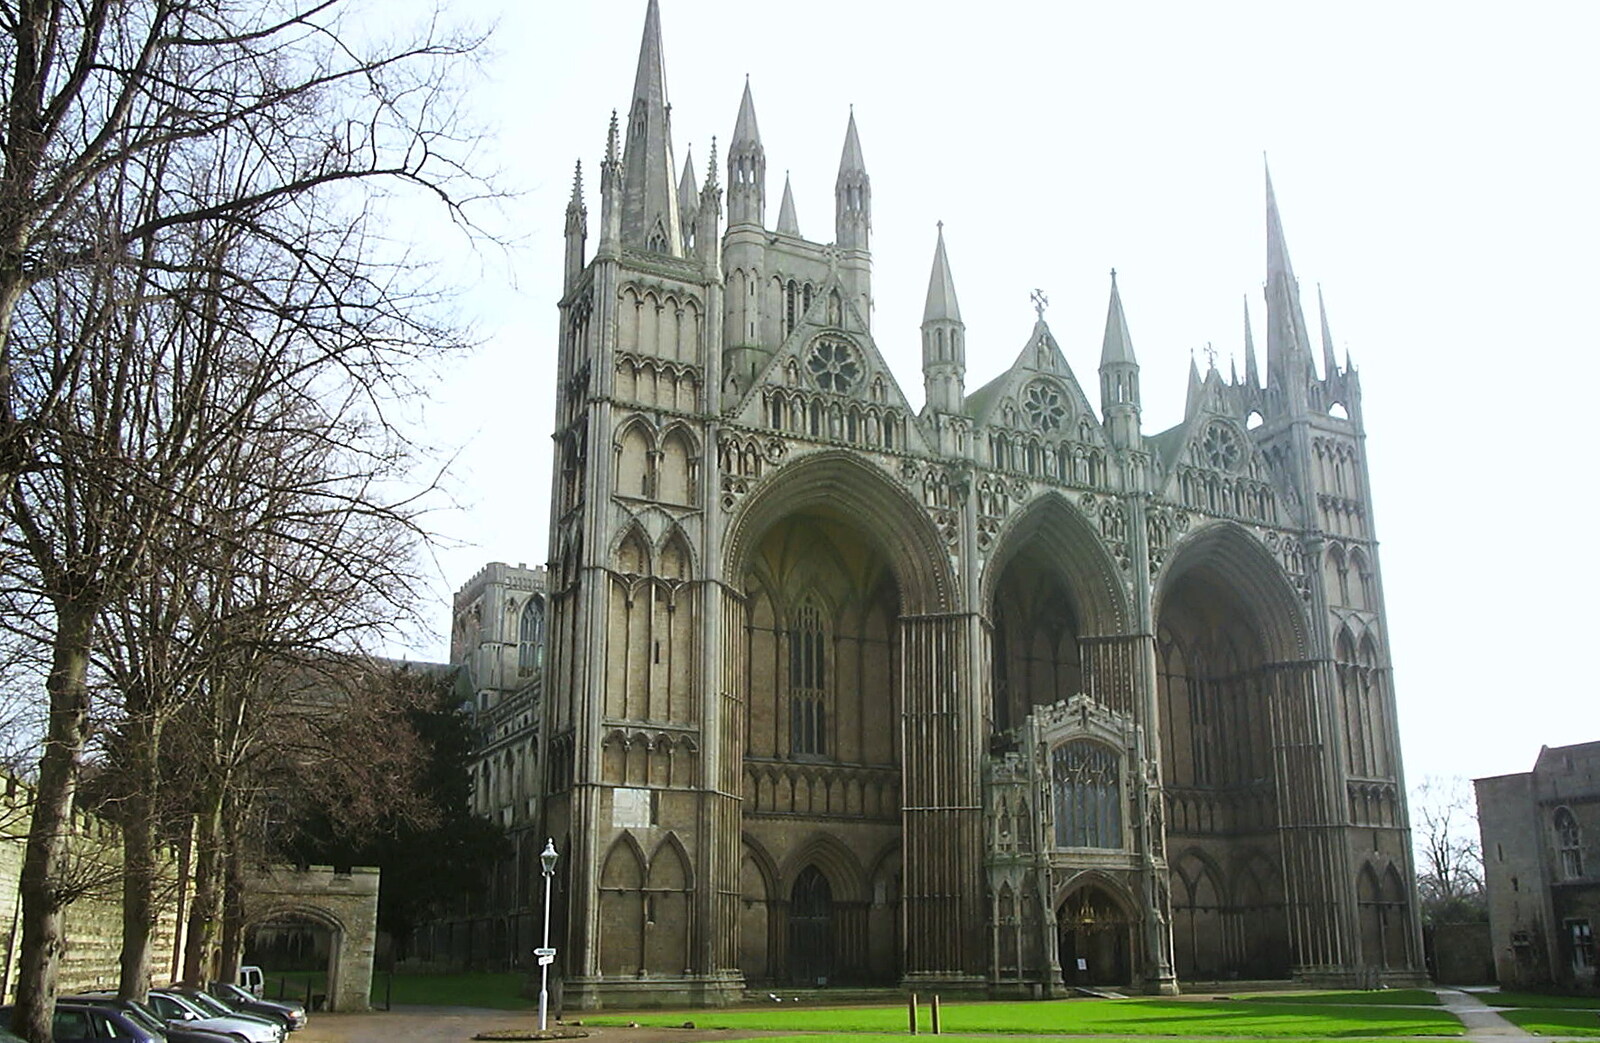 Another view of the impressive cathedral entrance from Marc Chops Trees, Richard Stallman and a March Miscellany, Suffolk and Cambridge - 5th March 2002